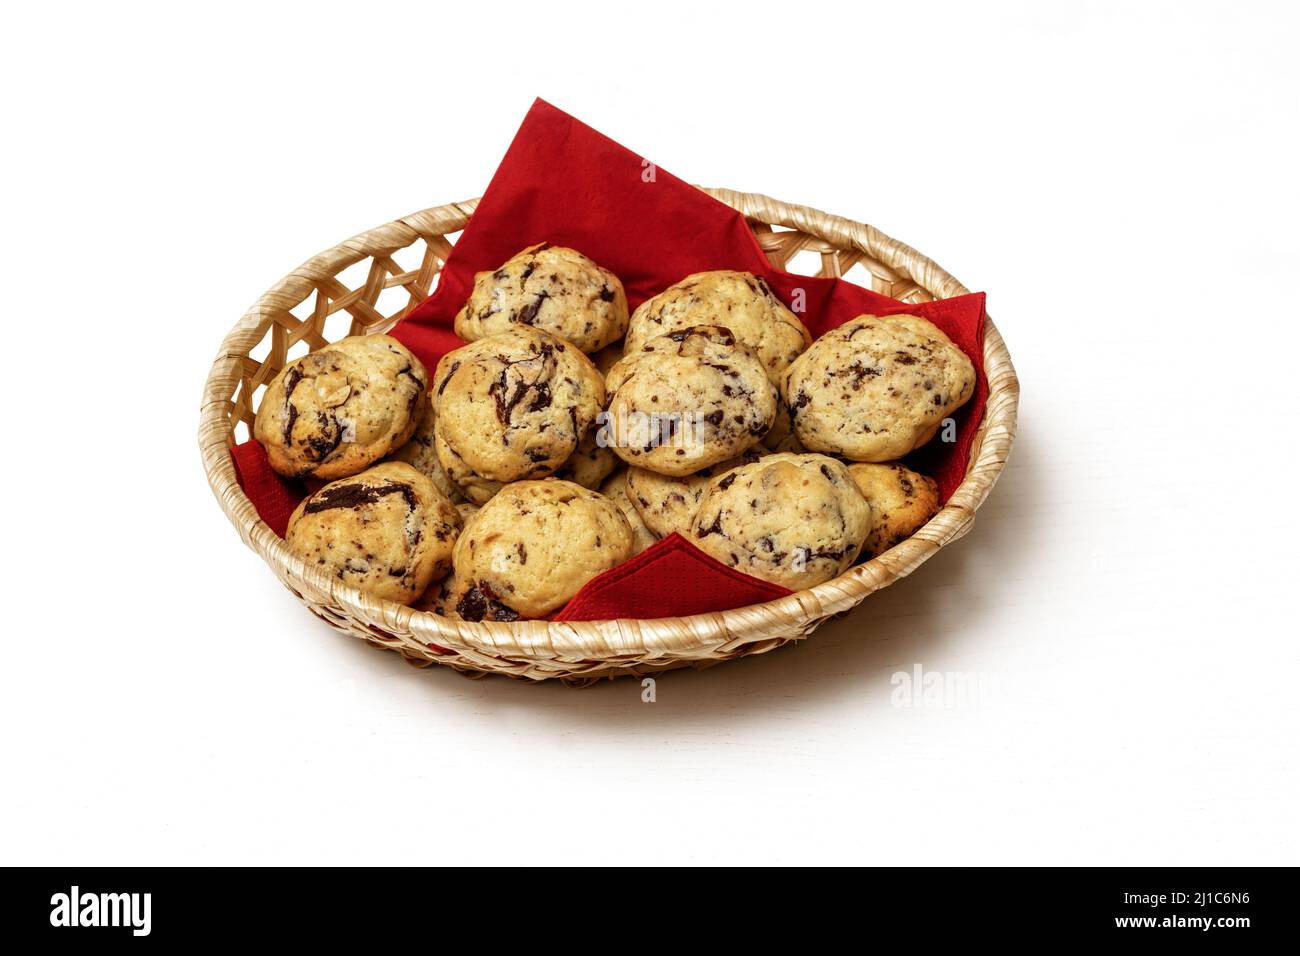 Basket on a white background with a red napkin and delicious homemade cookies stuffed with nuts and chocolate pieces. Stock Photo